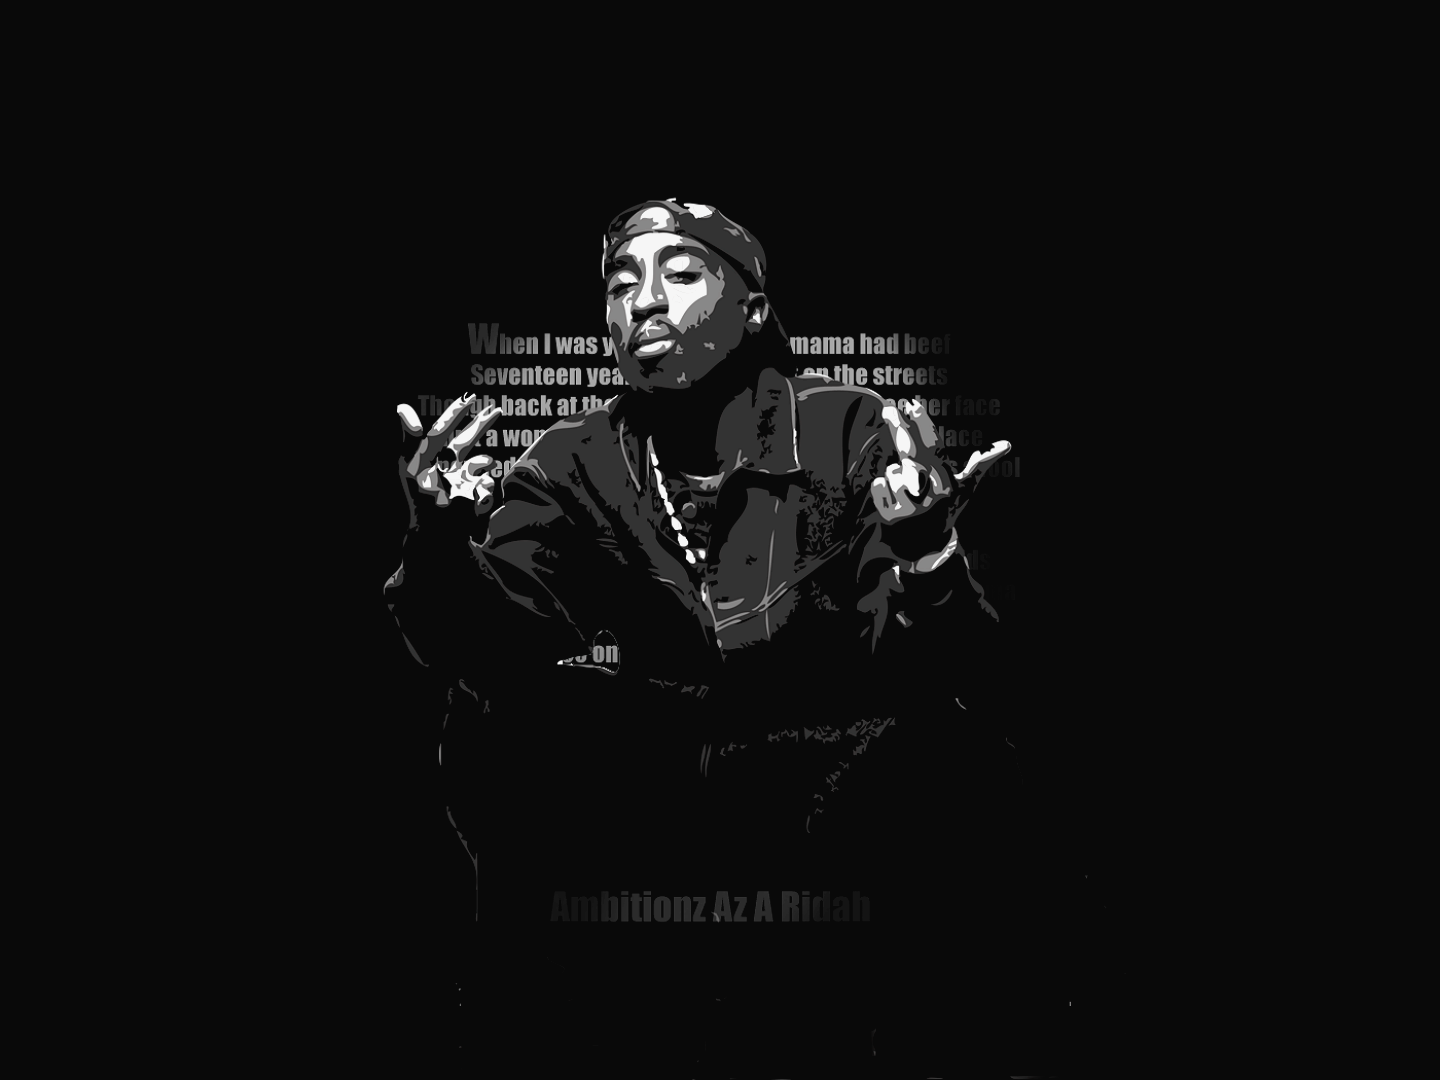 Tupac Backgrounds